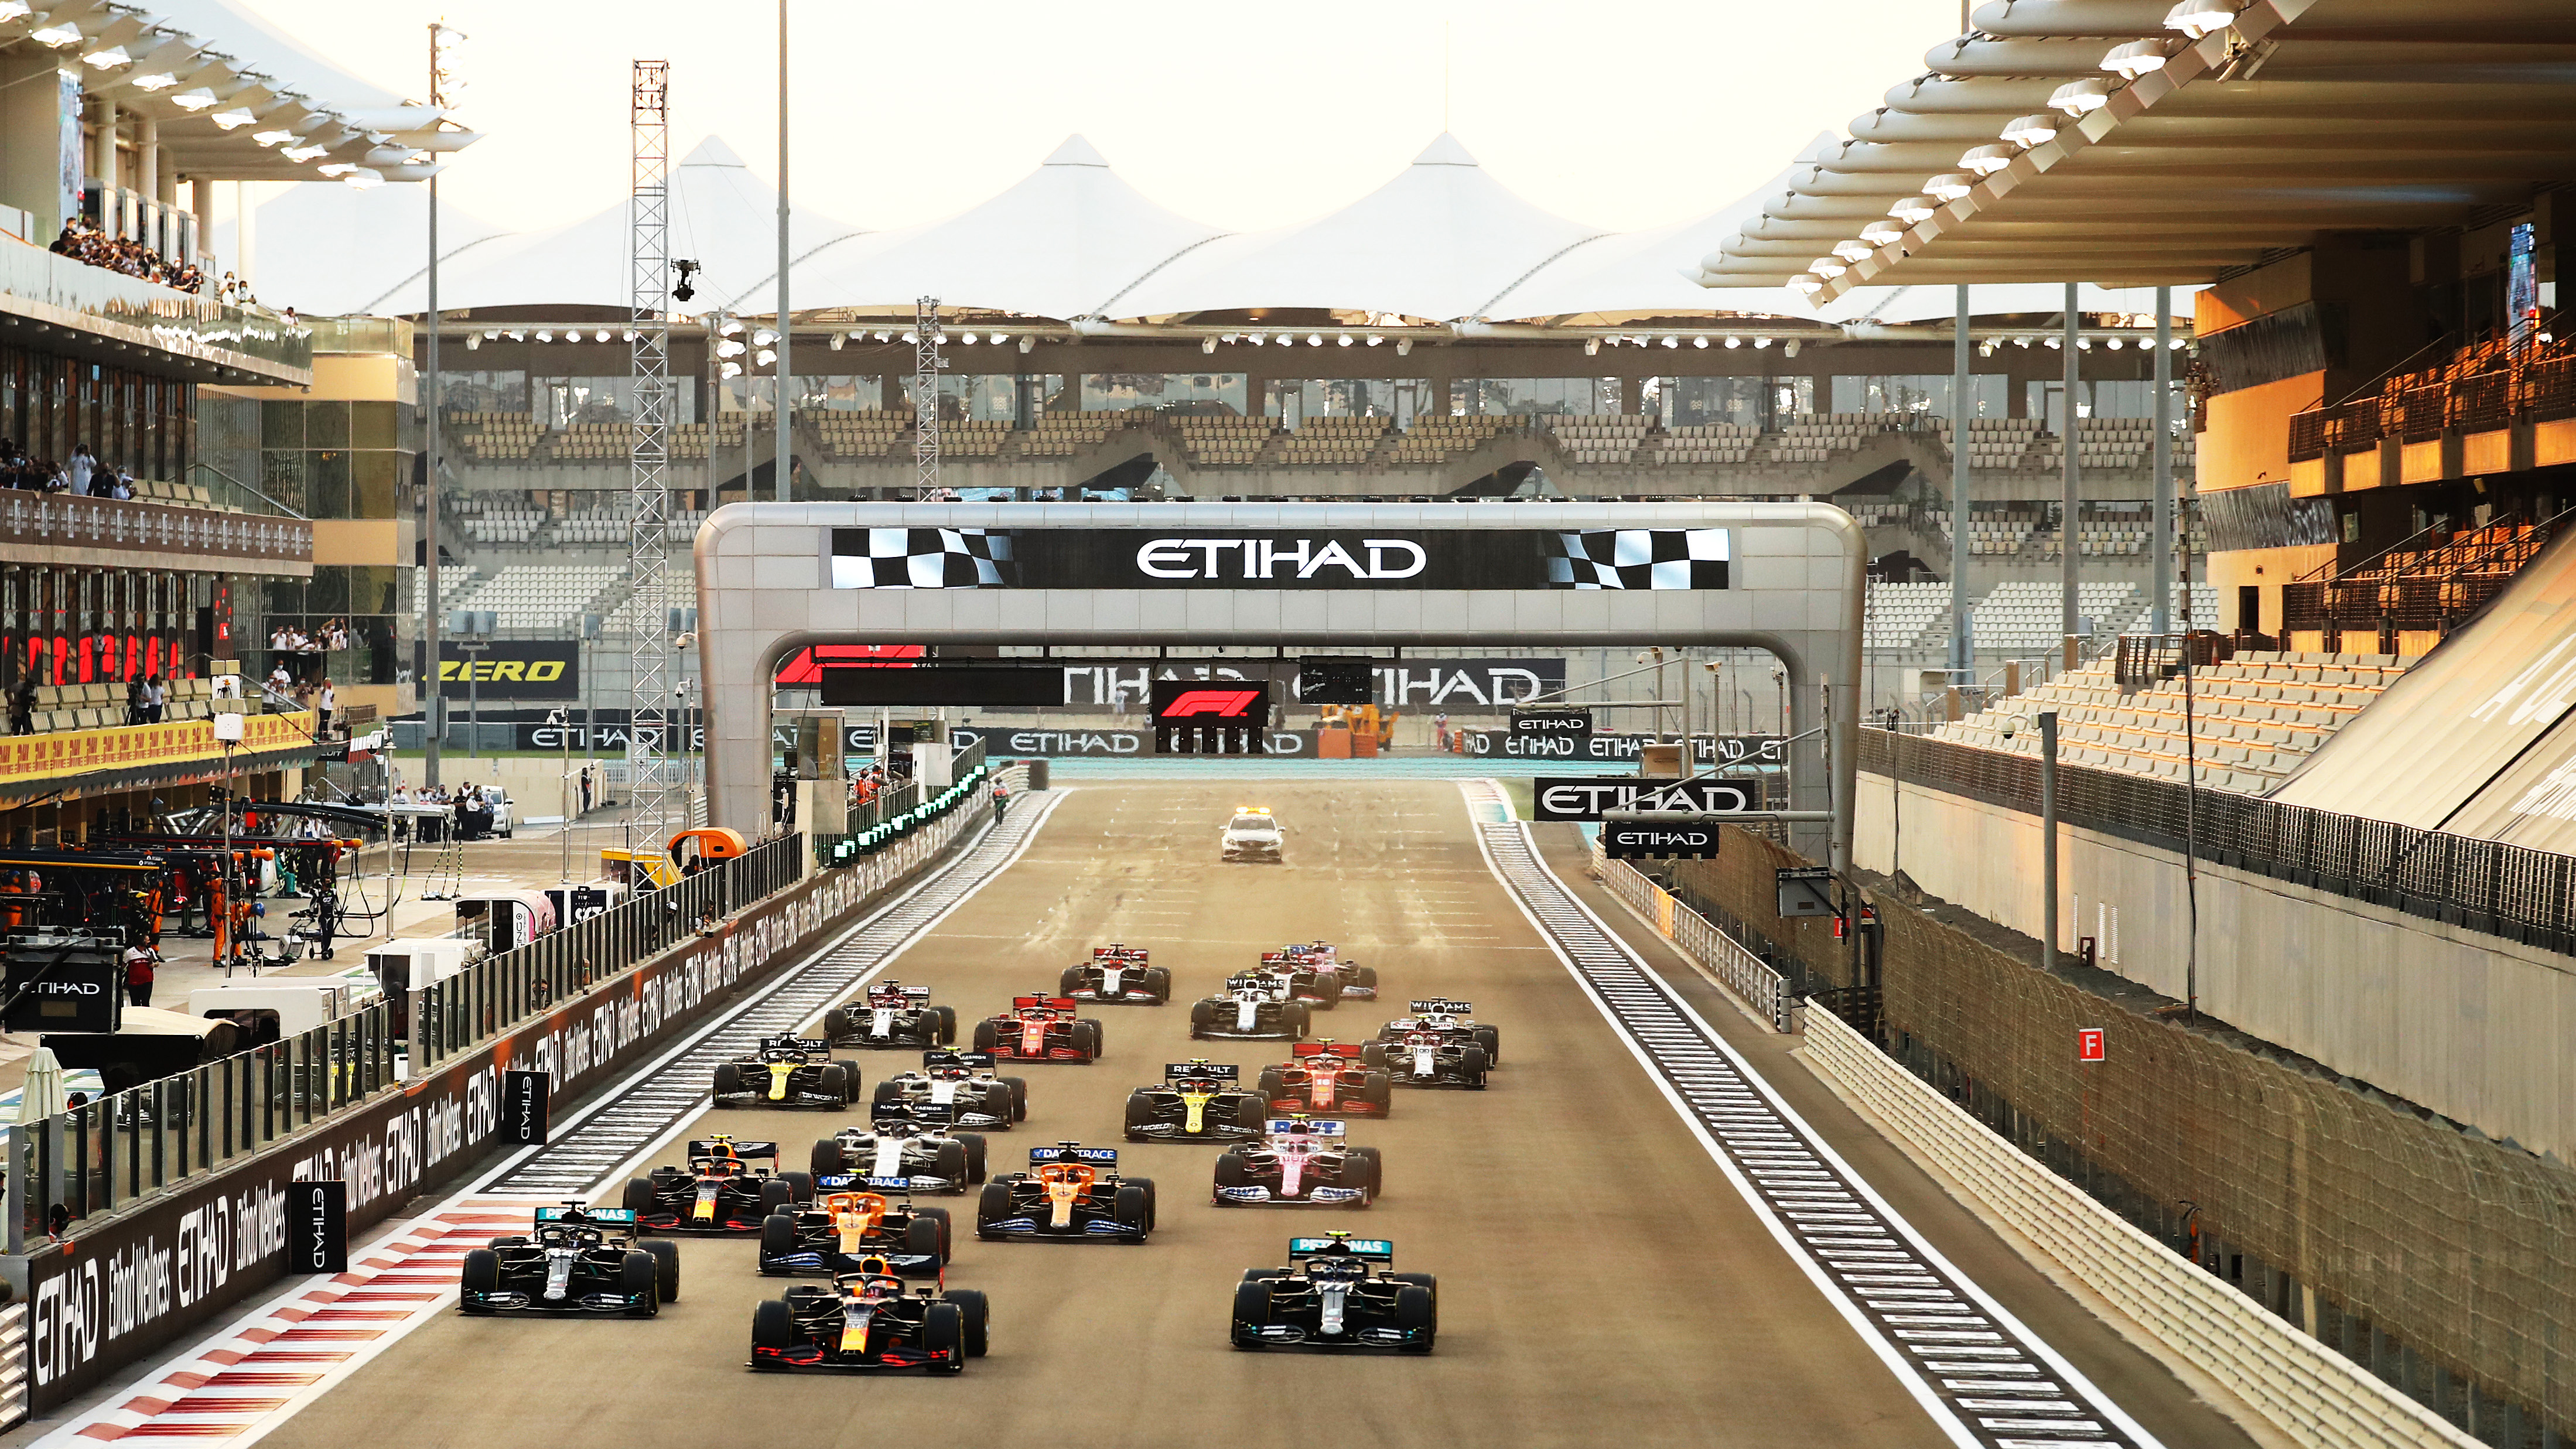 21 F1 Grand Prix Start Times Confirmed Including A Return To Races Starting On The Hour